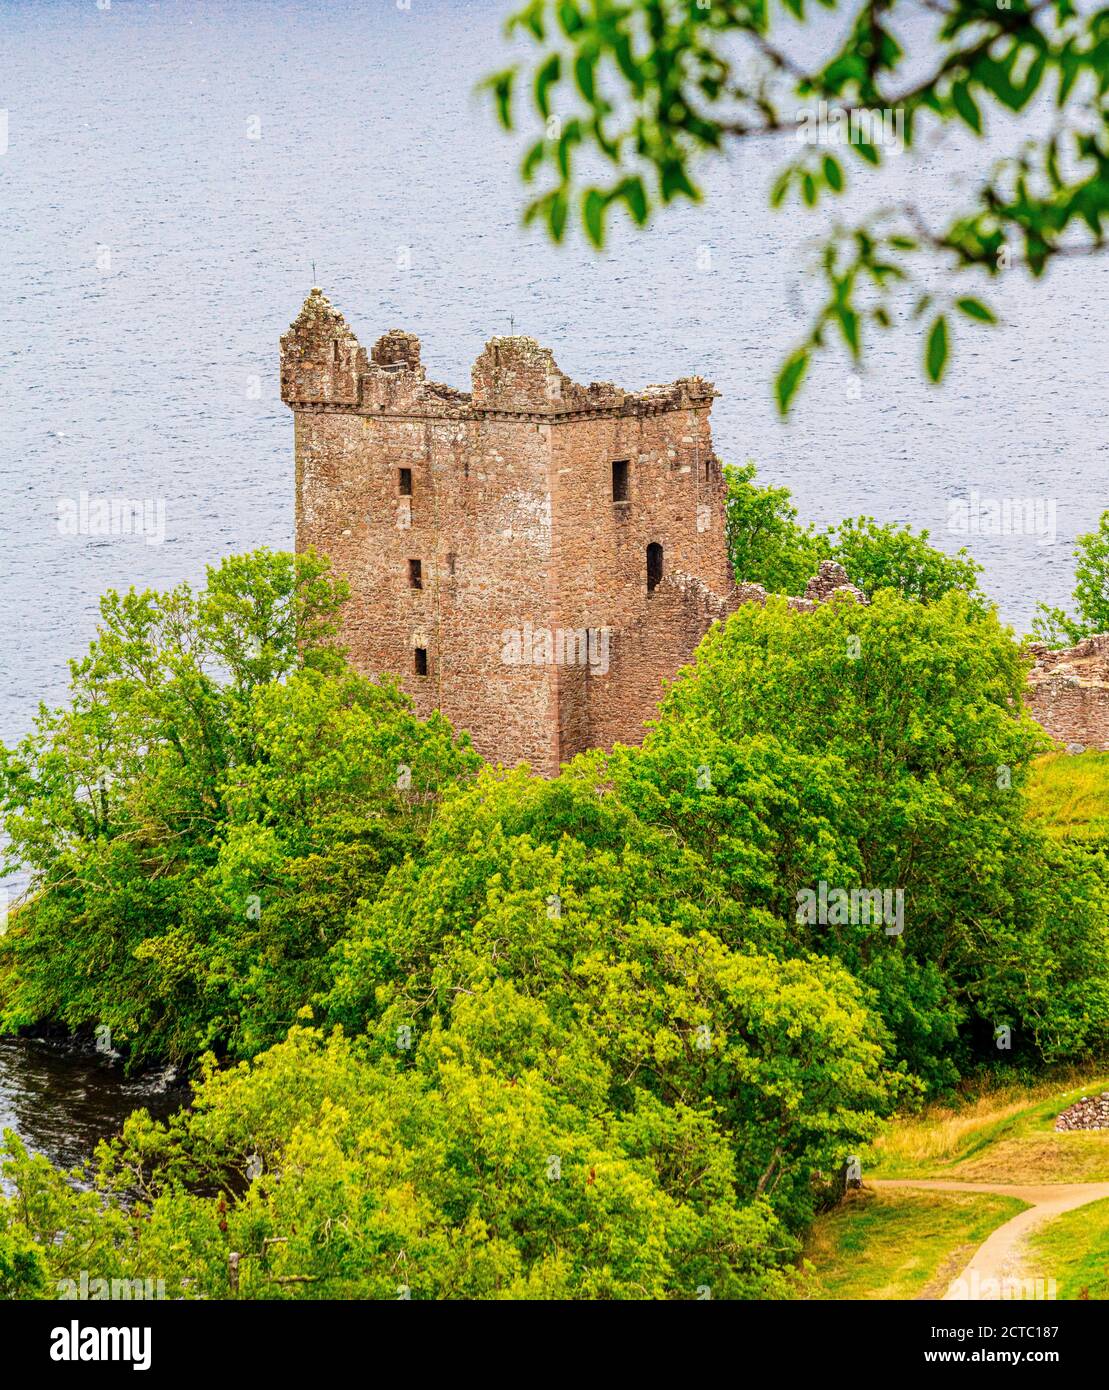 The picturesque ruins of Urquhart Castle  Caisteal na Sròine, famous for sightings of Nessie,   Loch Ness, Inverness,  Scotland Stock Photo